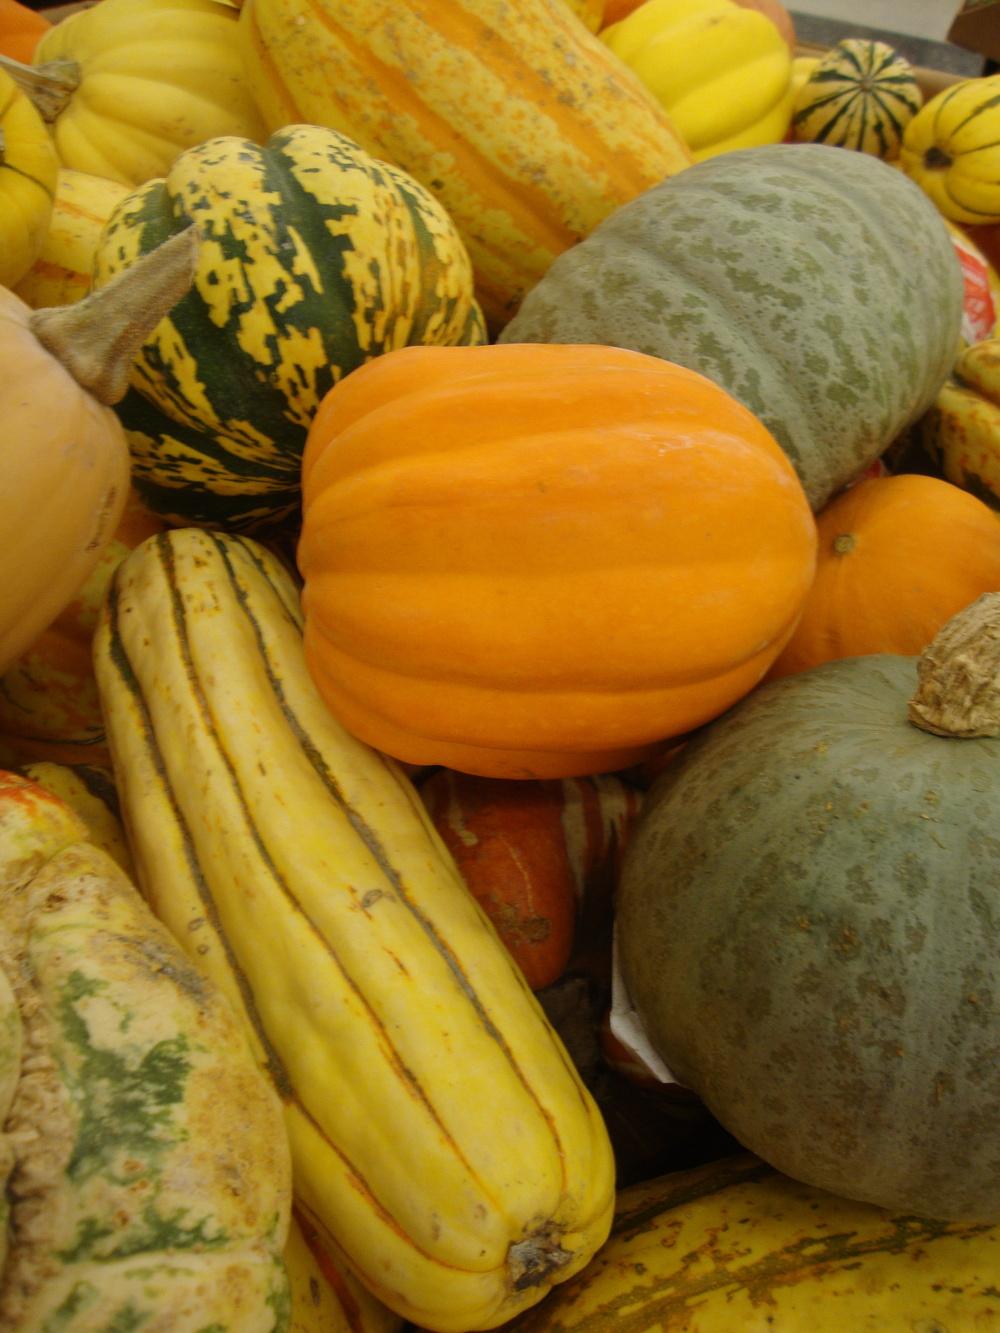 Photo of Gourds, Squashes and Pumpkins (Cucurbita) uploaded by Paul2032